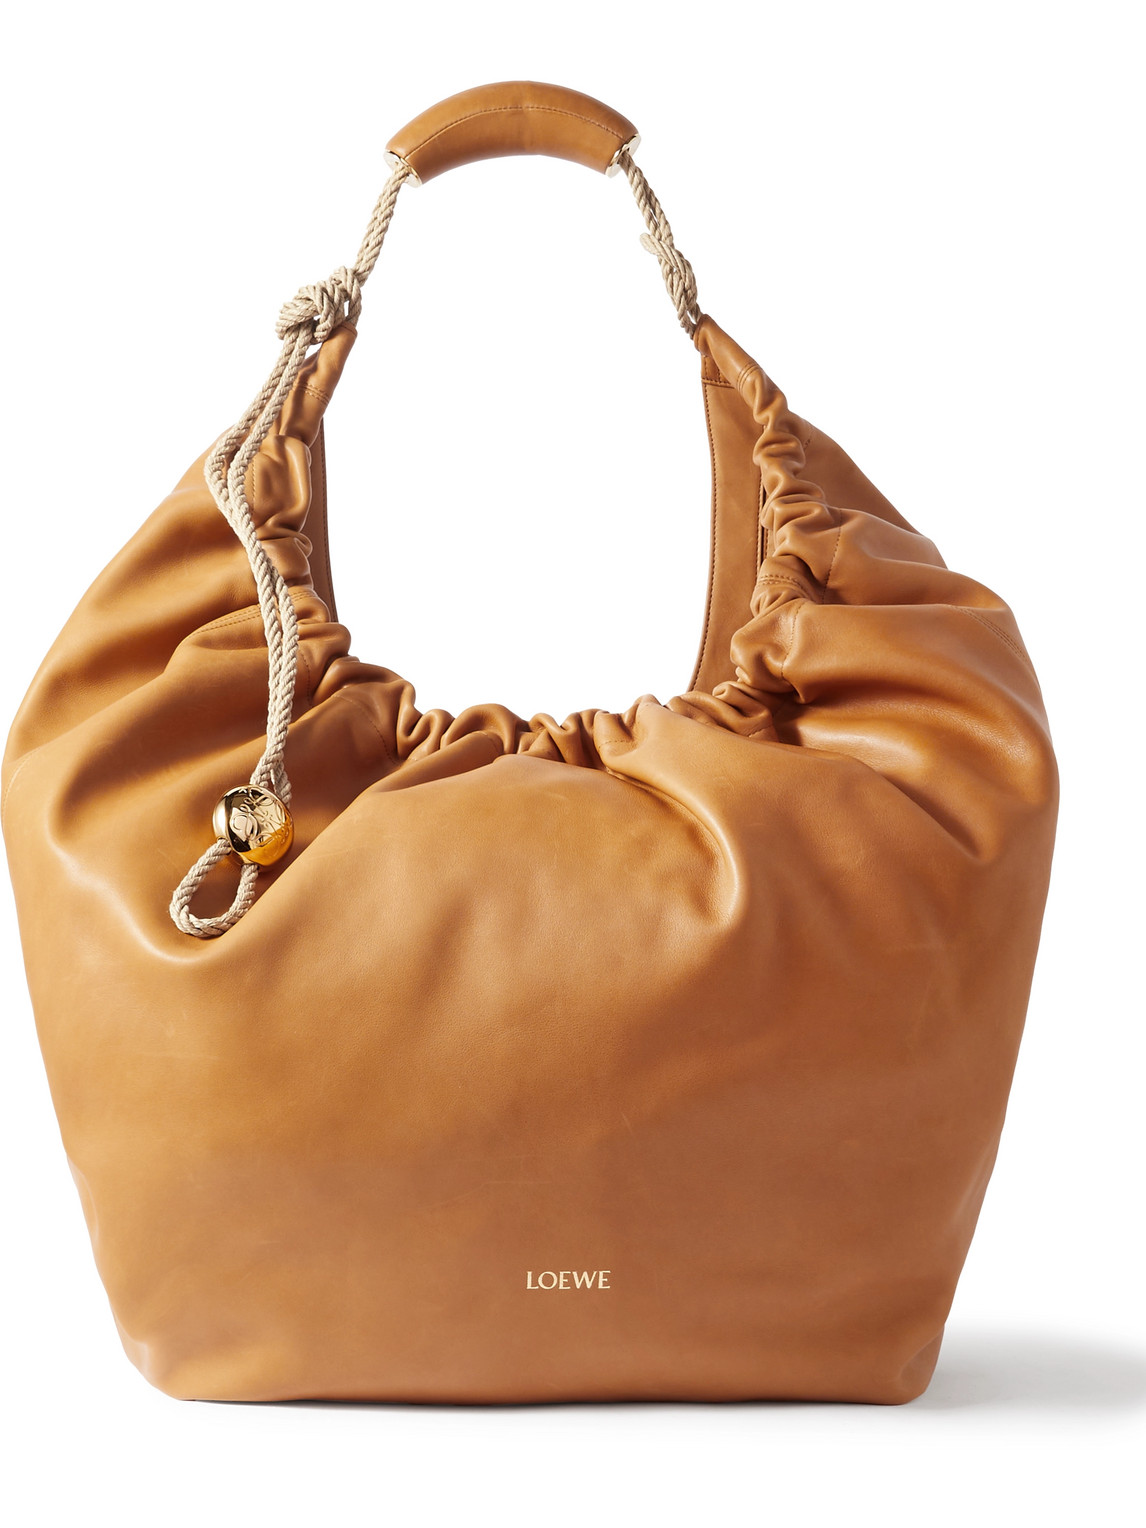 Loewe Paula's Ibiza Squeeze Xl Rope-trimmed Leather Tote Bag In Brown